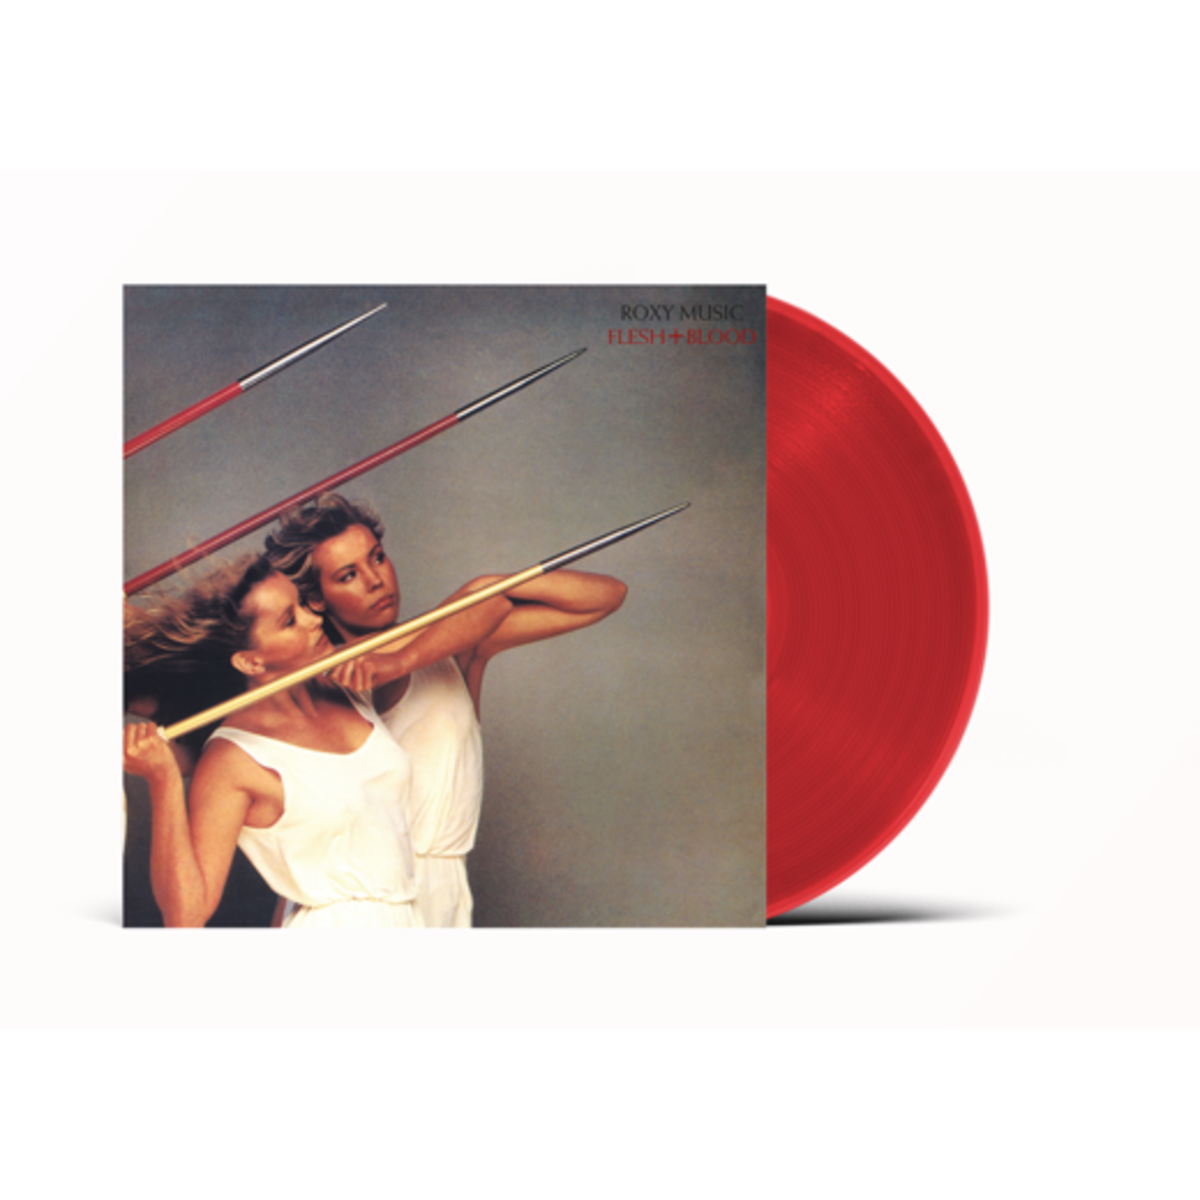 Roxy Music "Flesh and Blood" on red vinyl